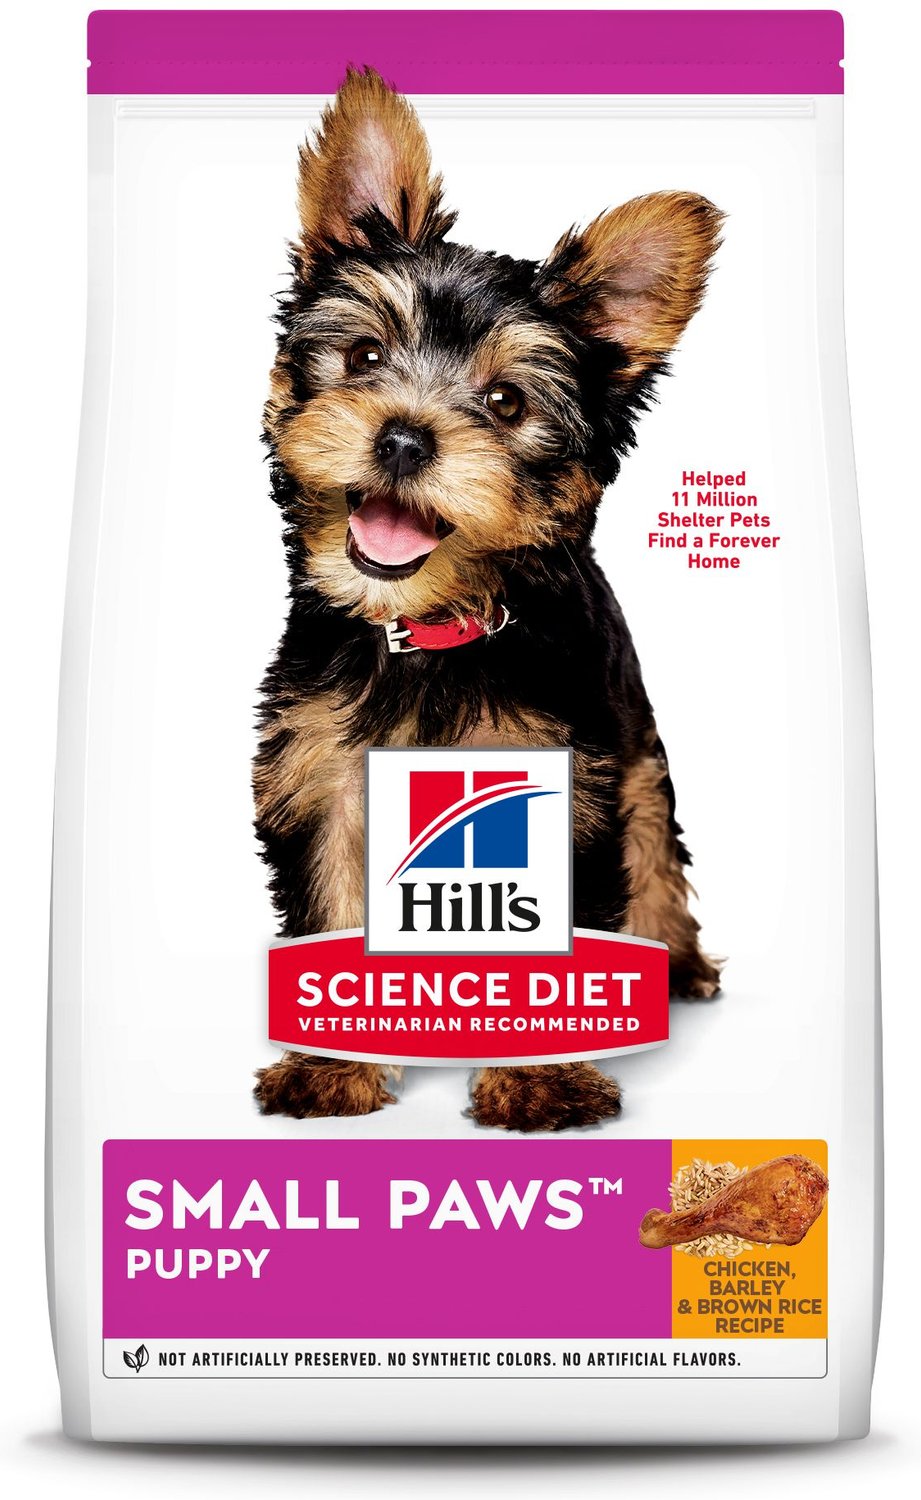 is-hill-s-science-diet-good-dog-food